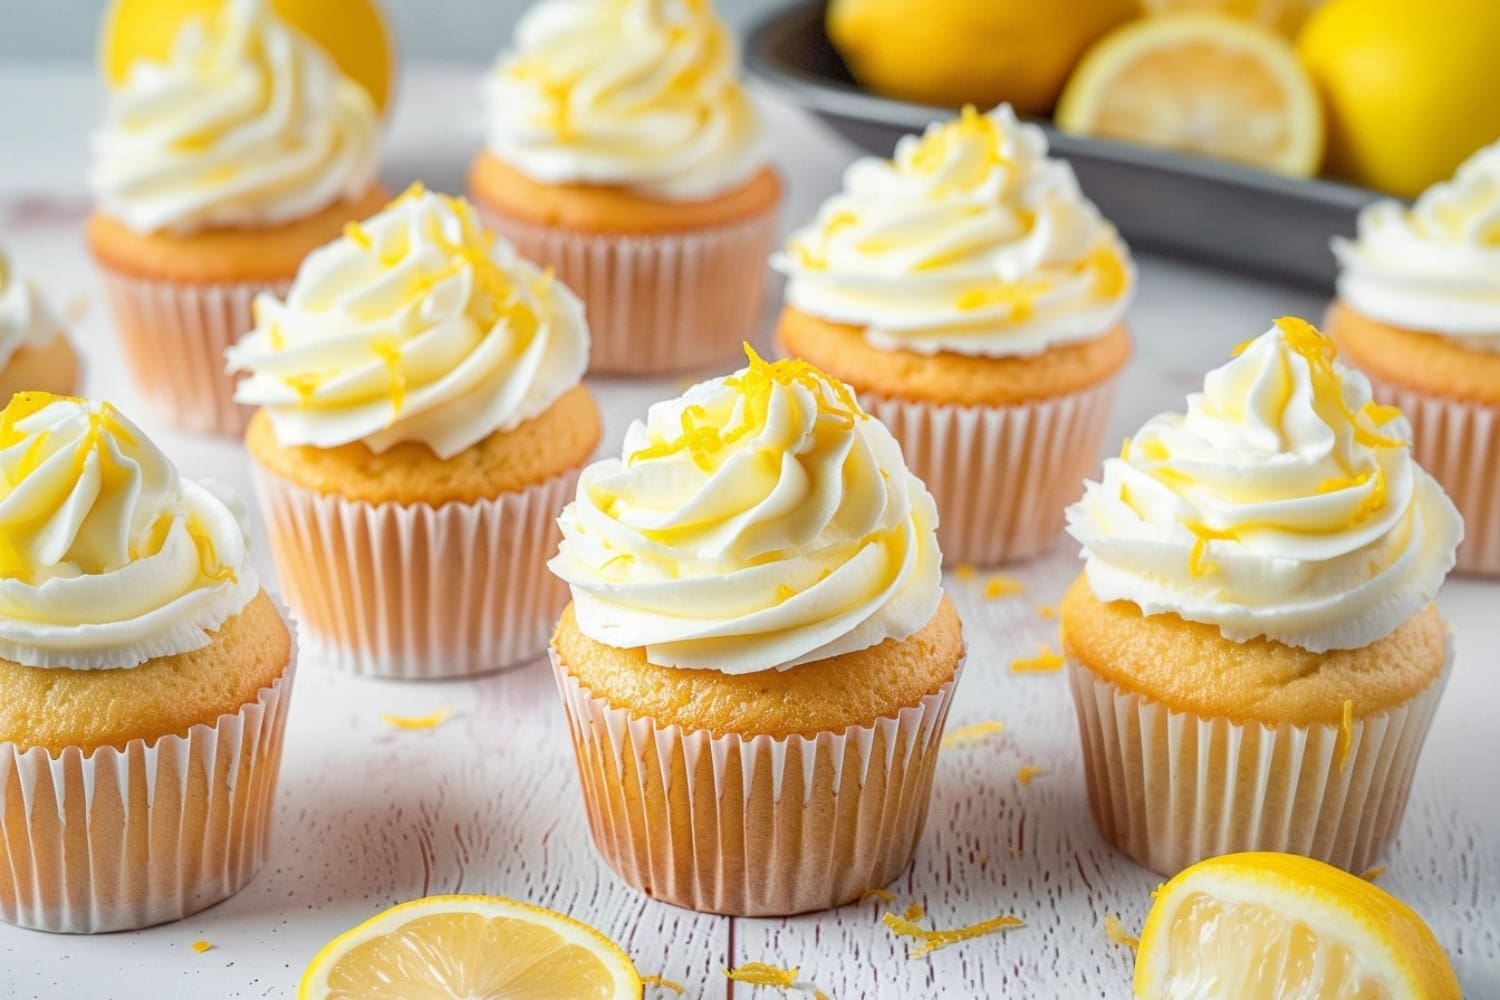 Cupcakes topped with lemon whipped cream.